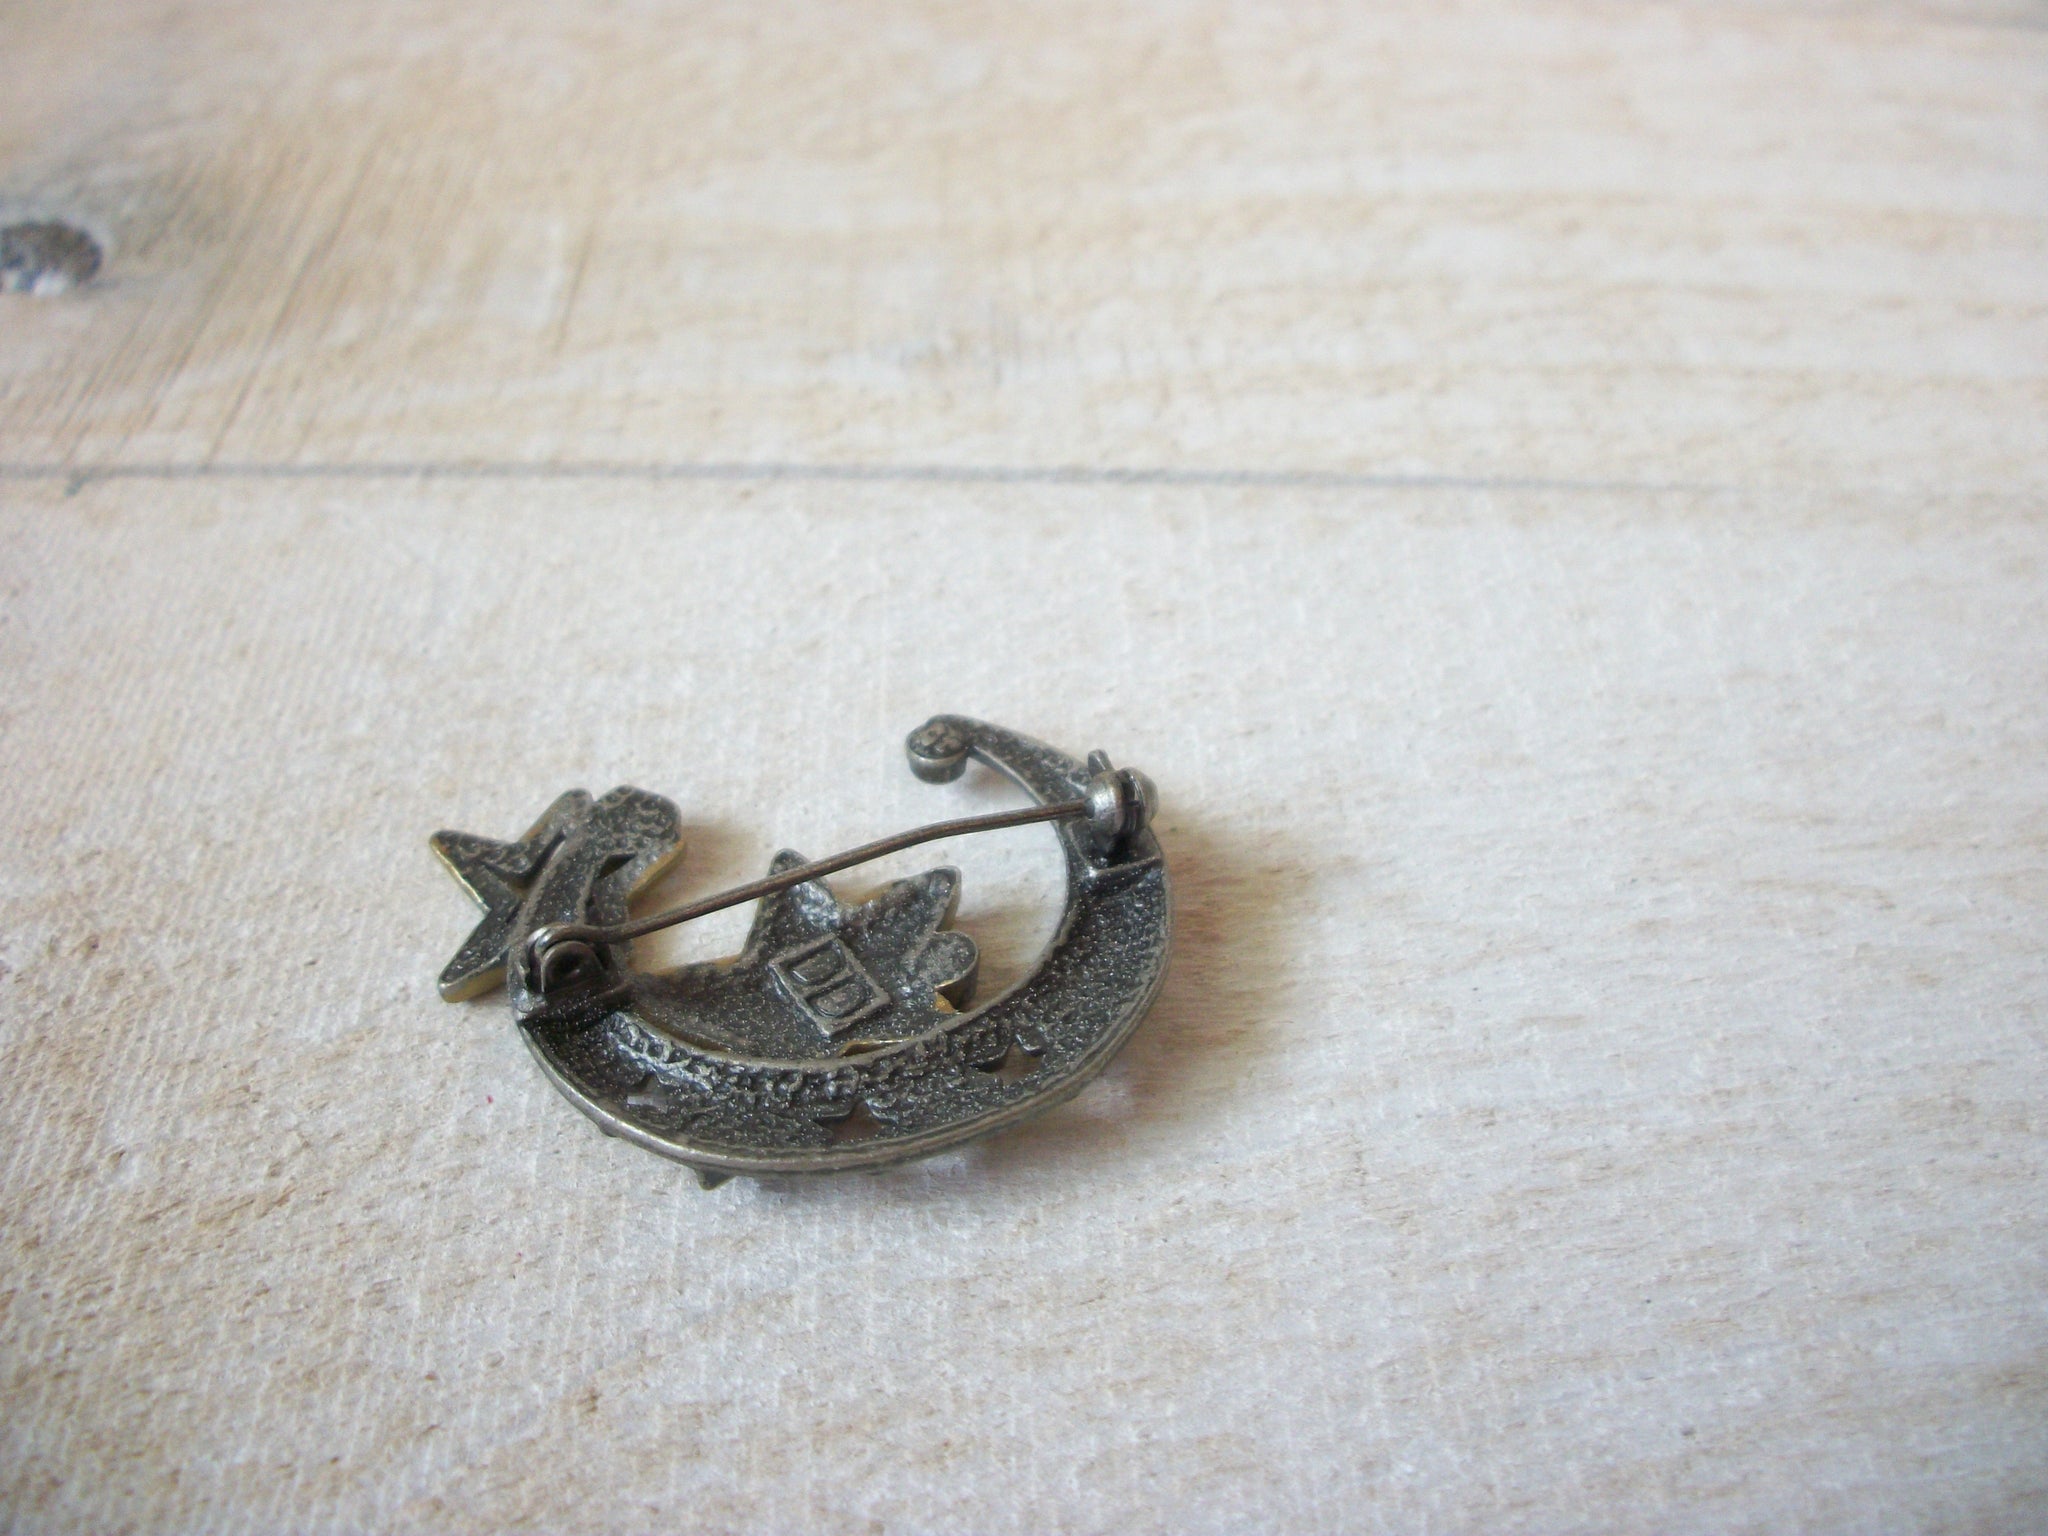 DD Stamped Crescent Moon Brooch 63020